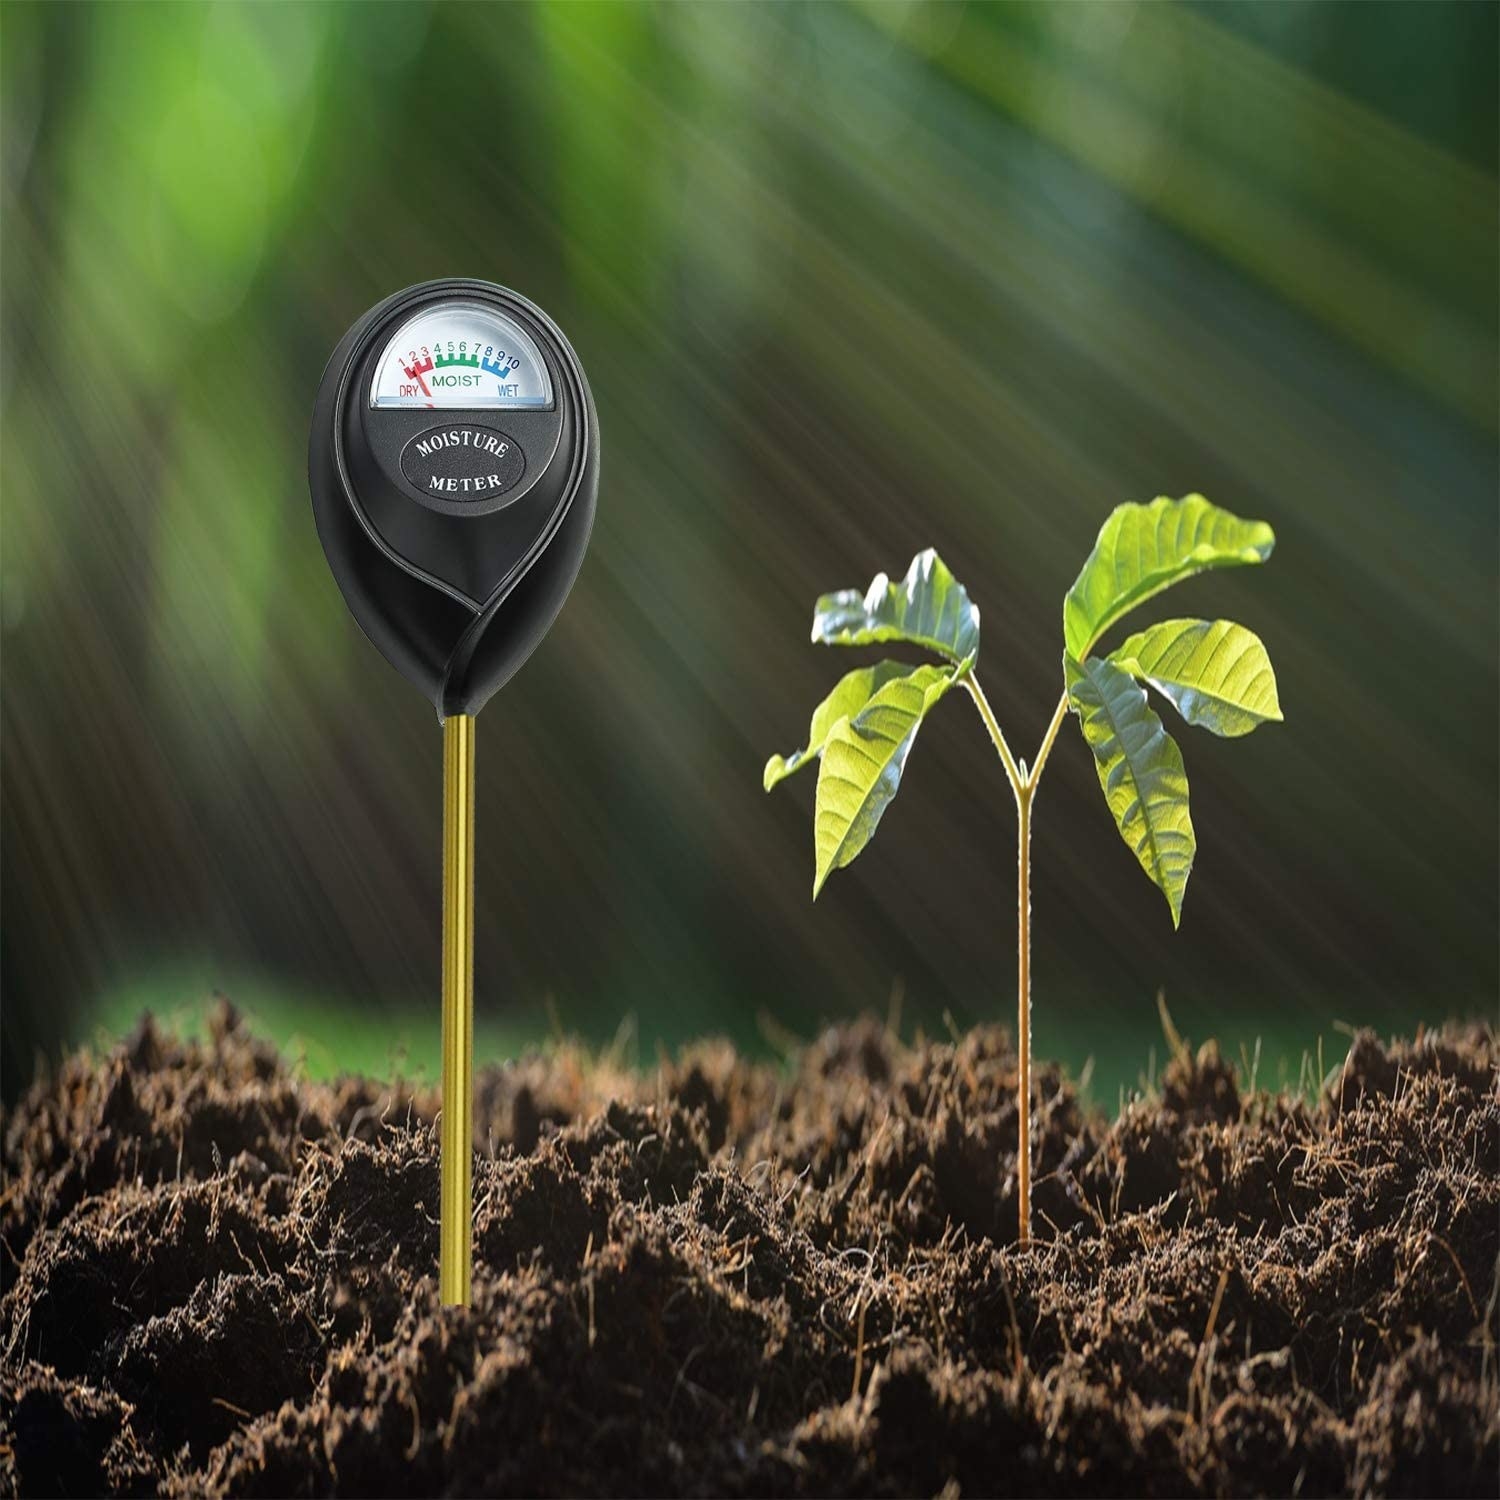 The meter next to a sprout in the soil